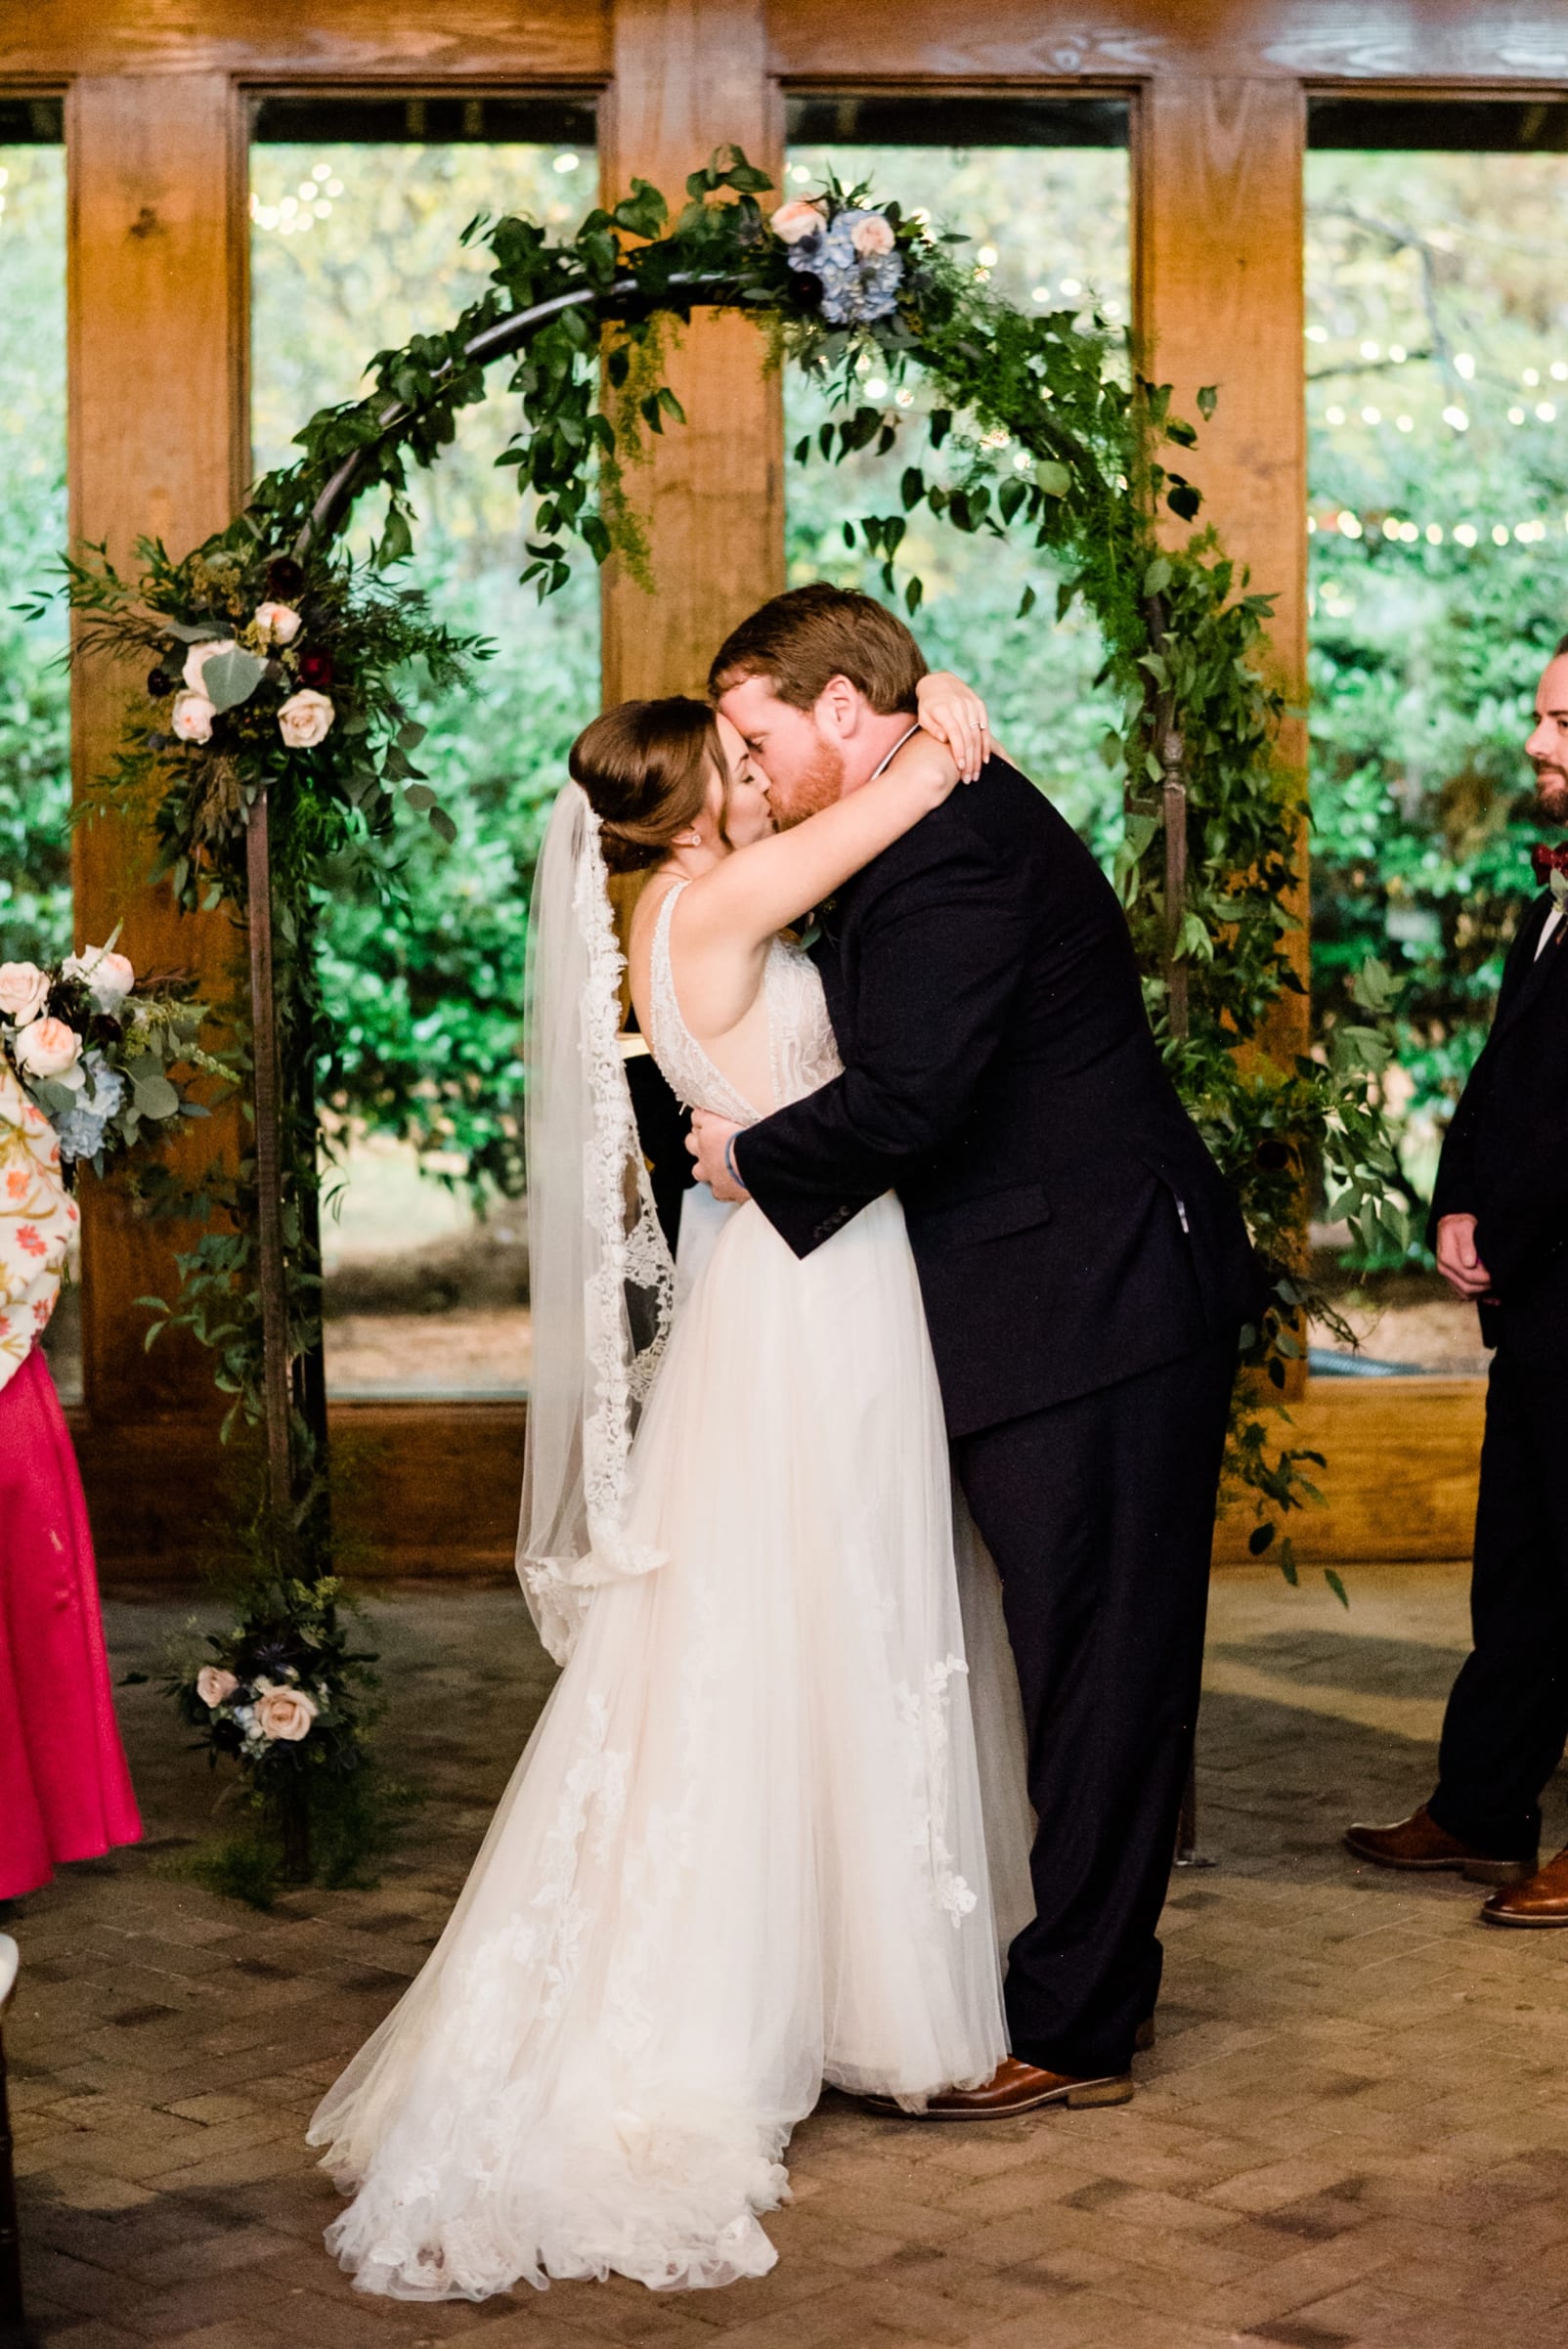 Sutherland Estate indoor wedding ceremony bride and groom first kiss under floral arch photo